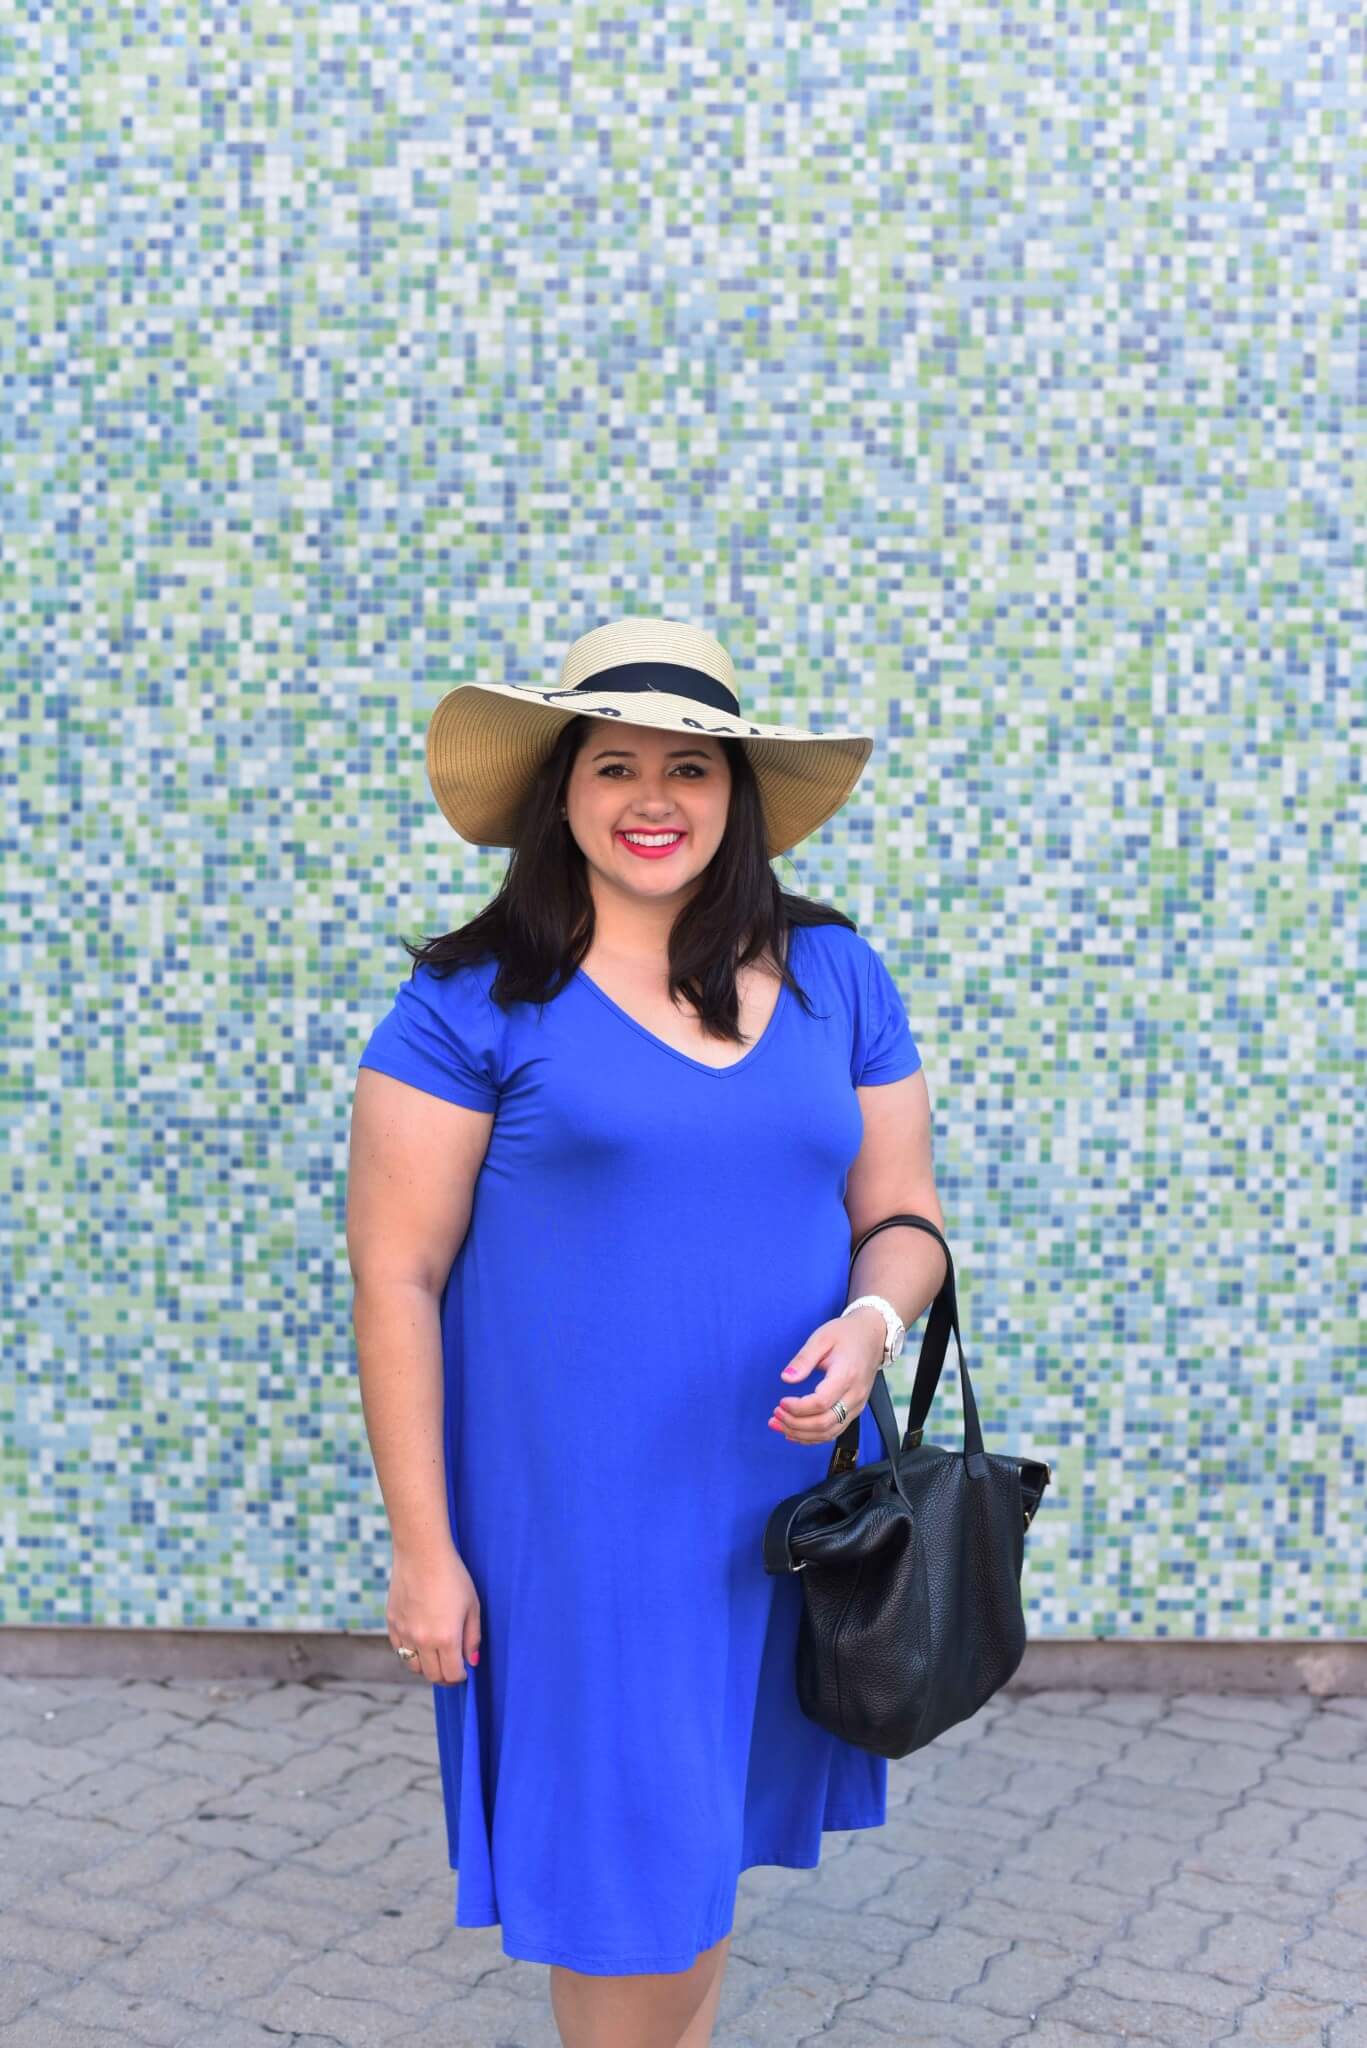 What to wear on a summer weekend day for being a tourist in your own city. A chic summer dress, an adorable printed pair of sneakers and a hat create an eyecatching look. #plussize #plussizeblogger #summerstyle #summerdress